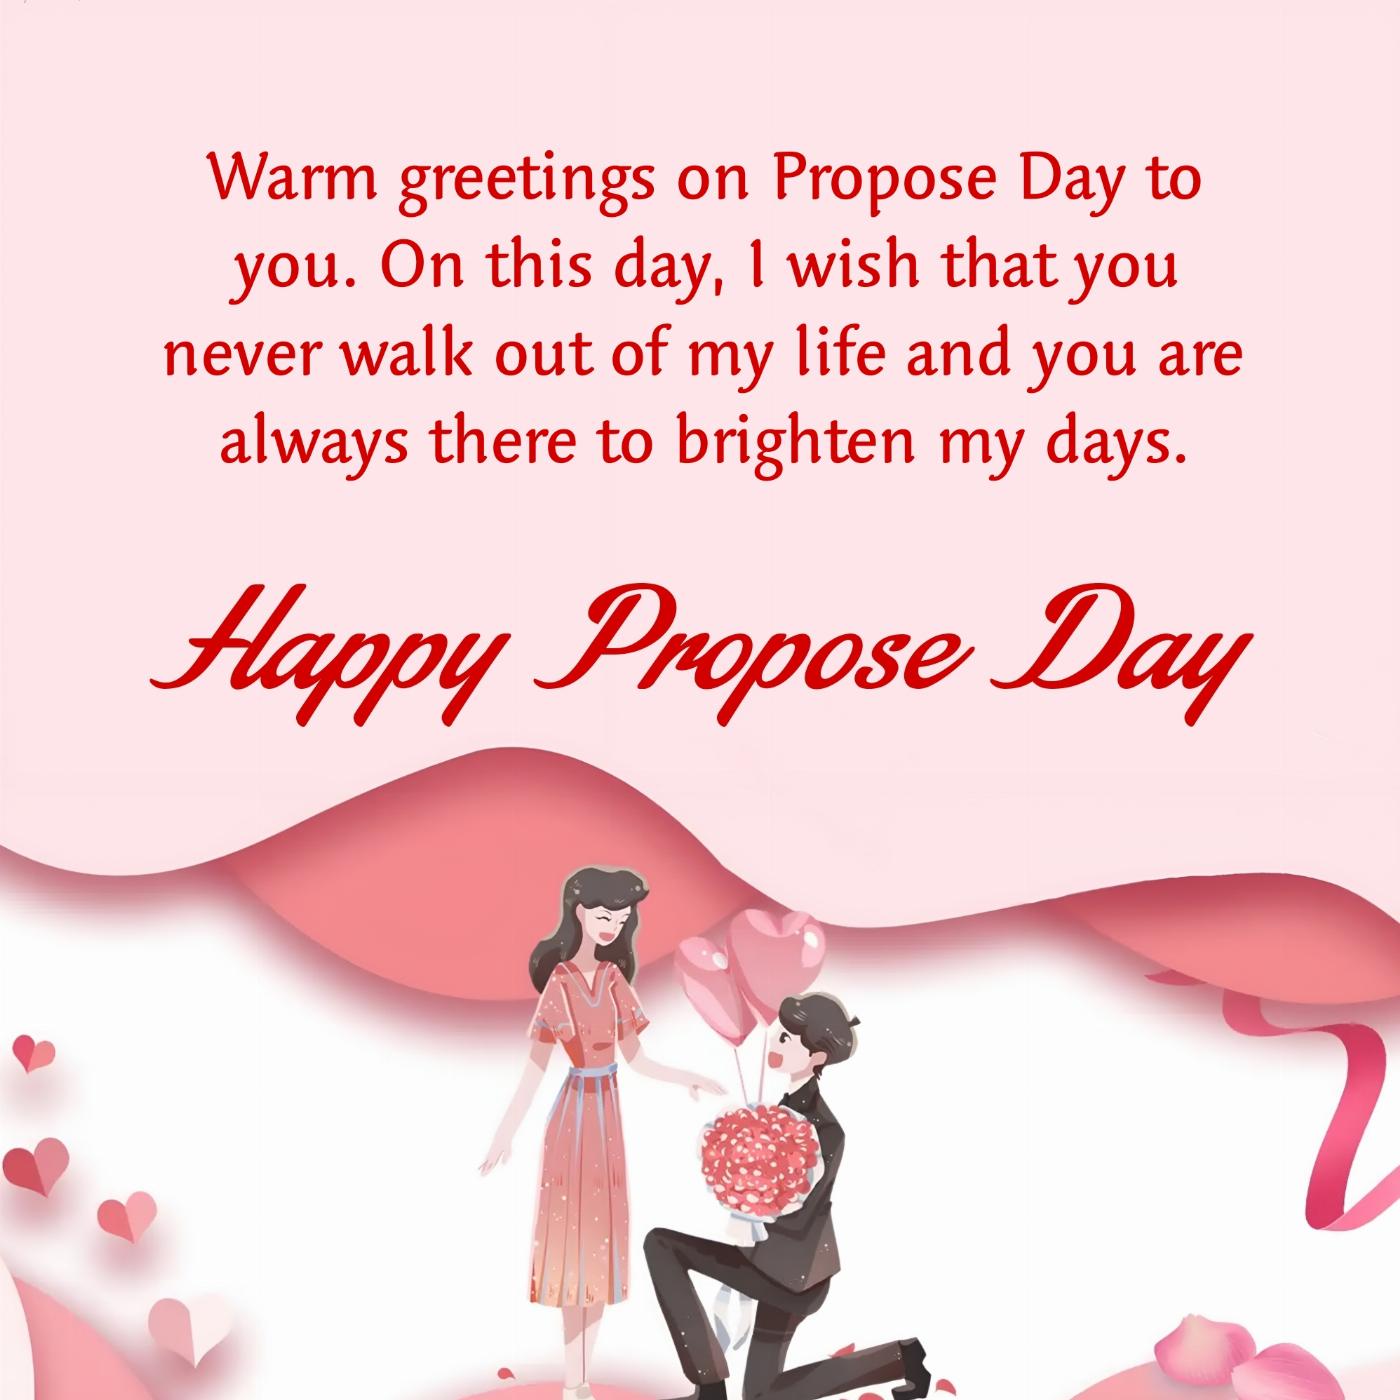 Warm greetings on Propose Day to you